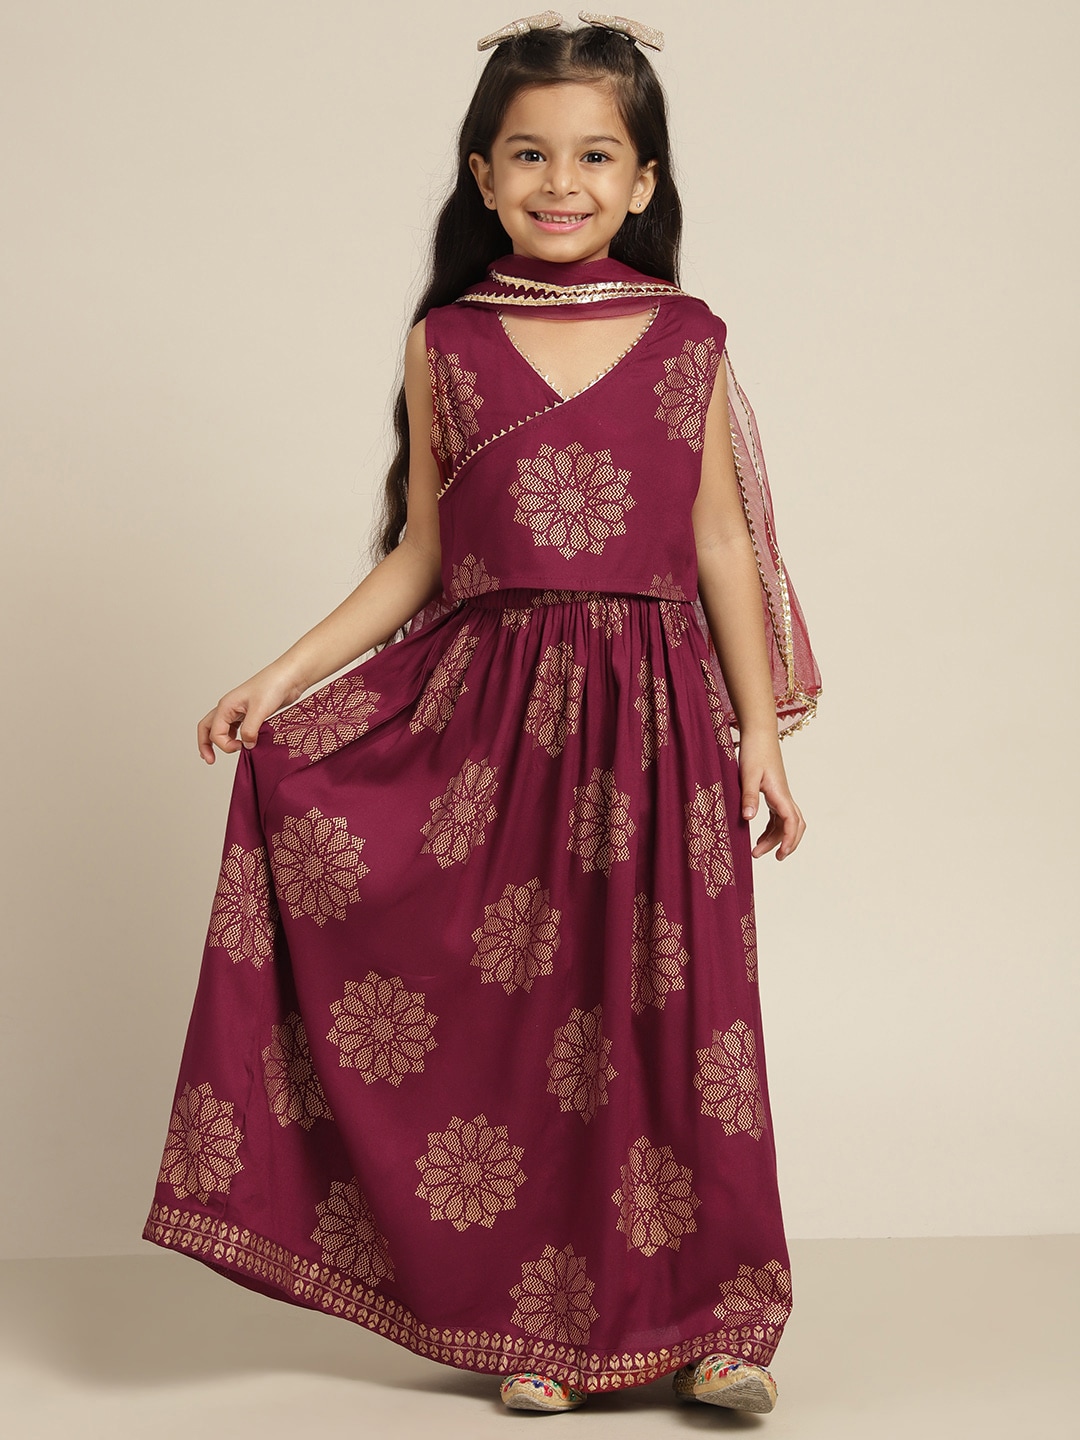 Sangria Girls Maroon & Gold-Toned Floral Print Ready to Wear Lehenga Choli Price in India